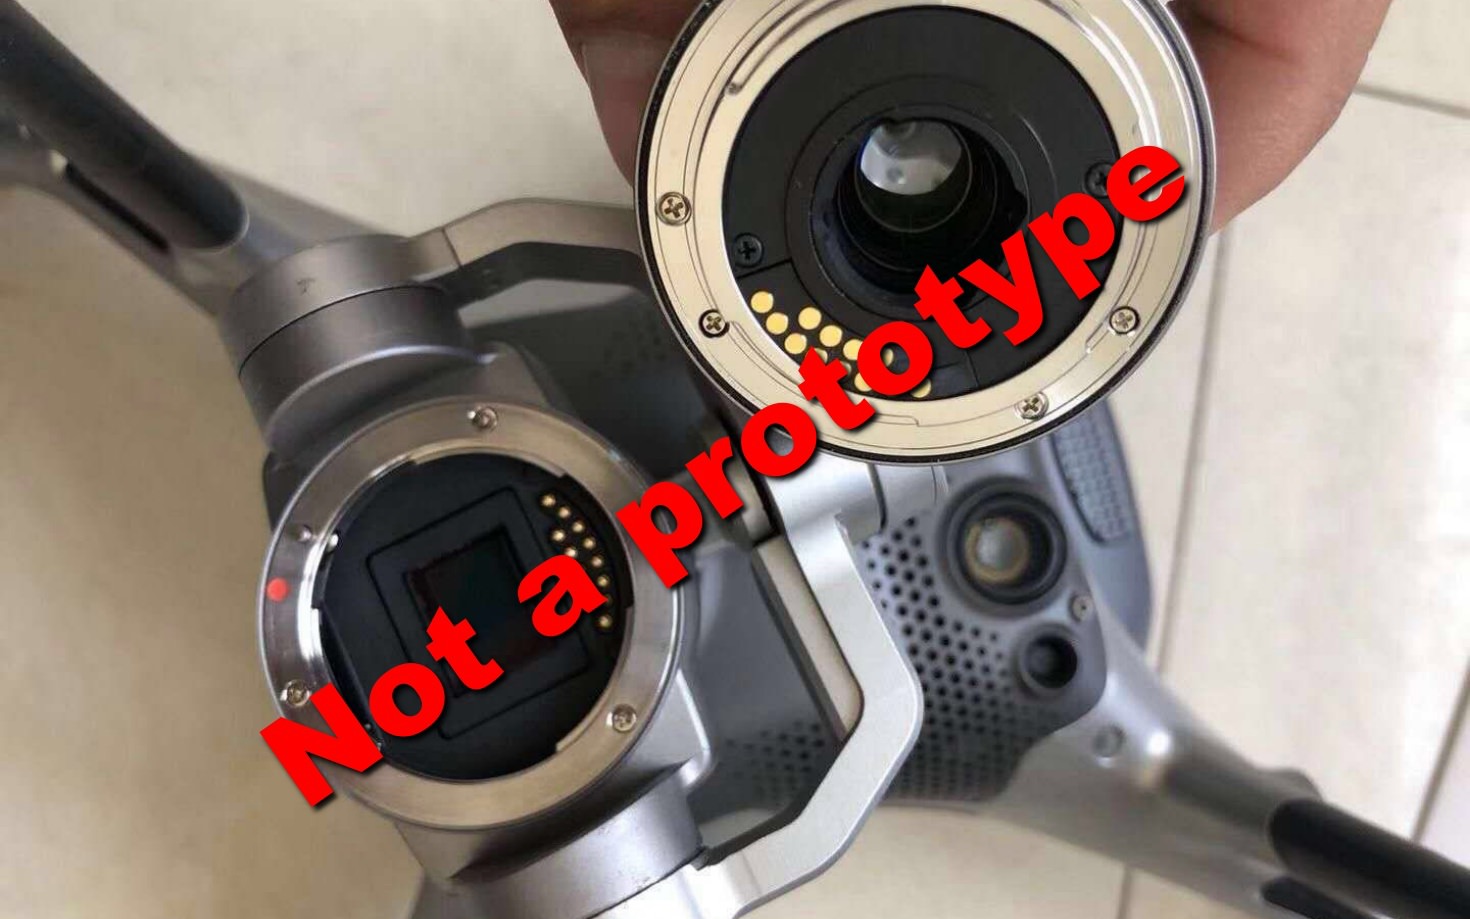 DJI reaffirms that leaked photos are not a Phantom 5 prototype